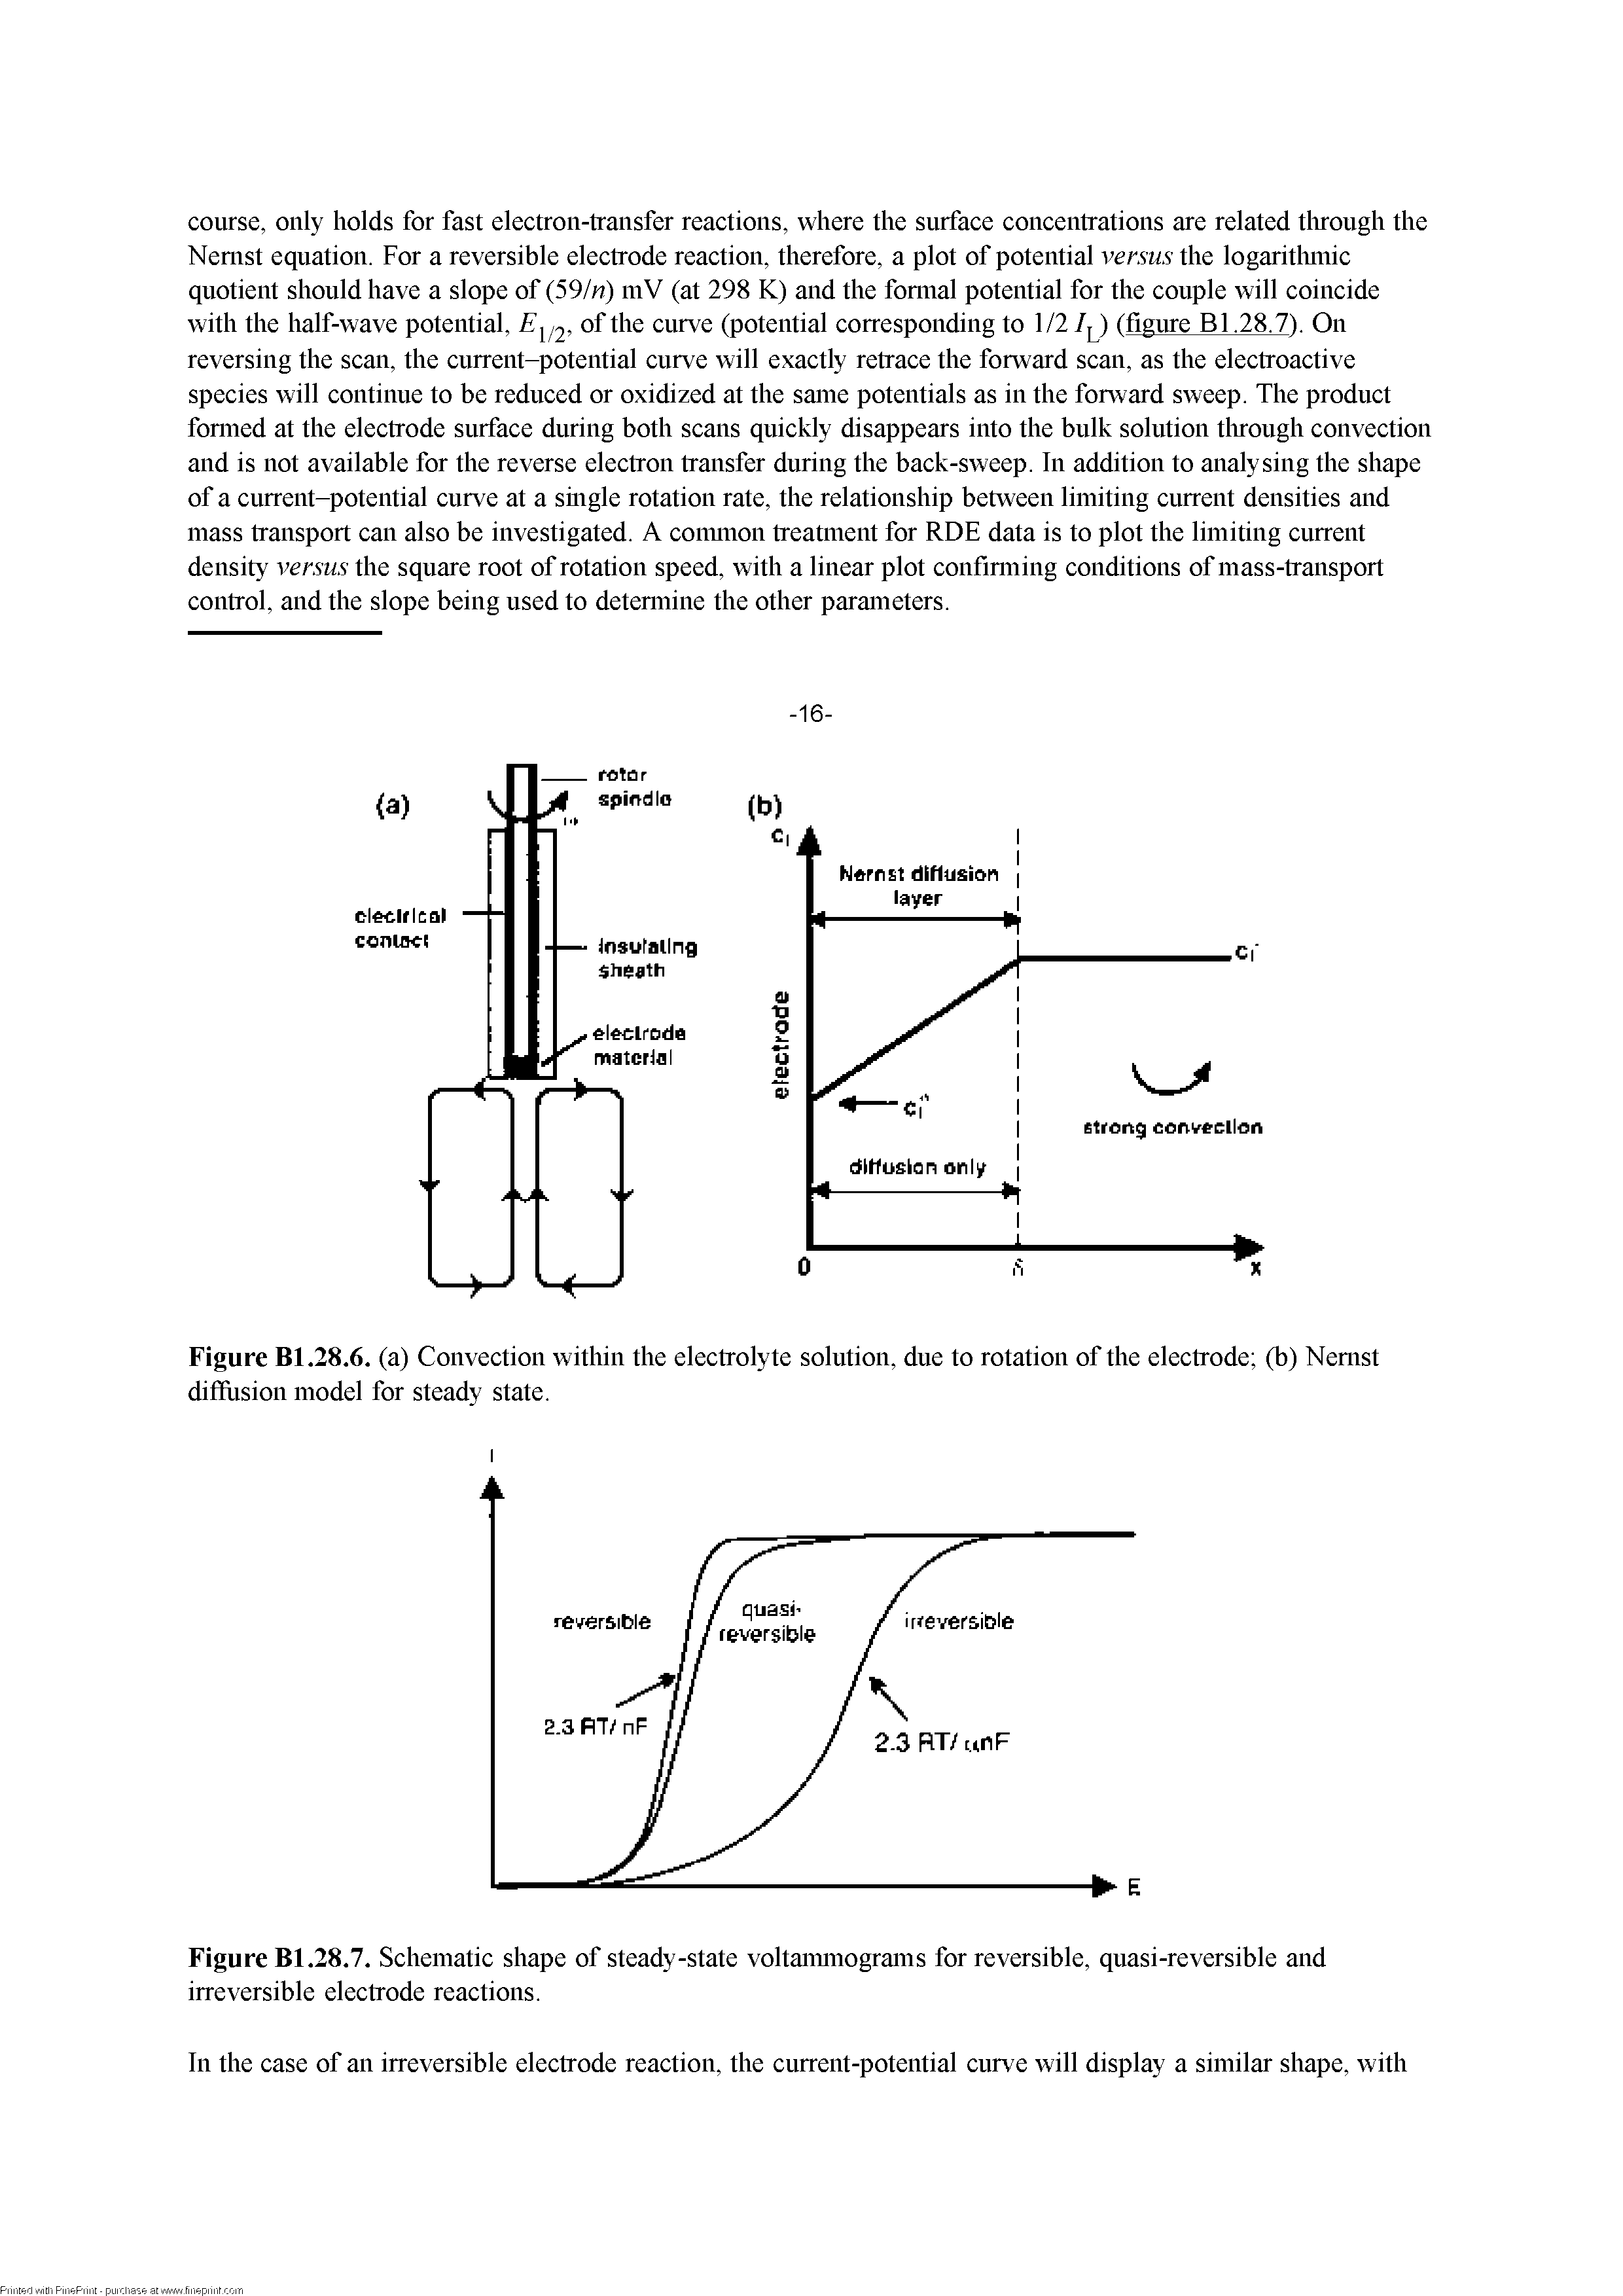 Figure Bl.28.6. (a) Convection within the electrolyte solution, due to rotation of the electrode (b) Nemst diflfiision model for steady state.